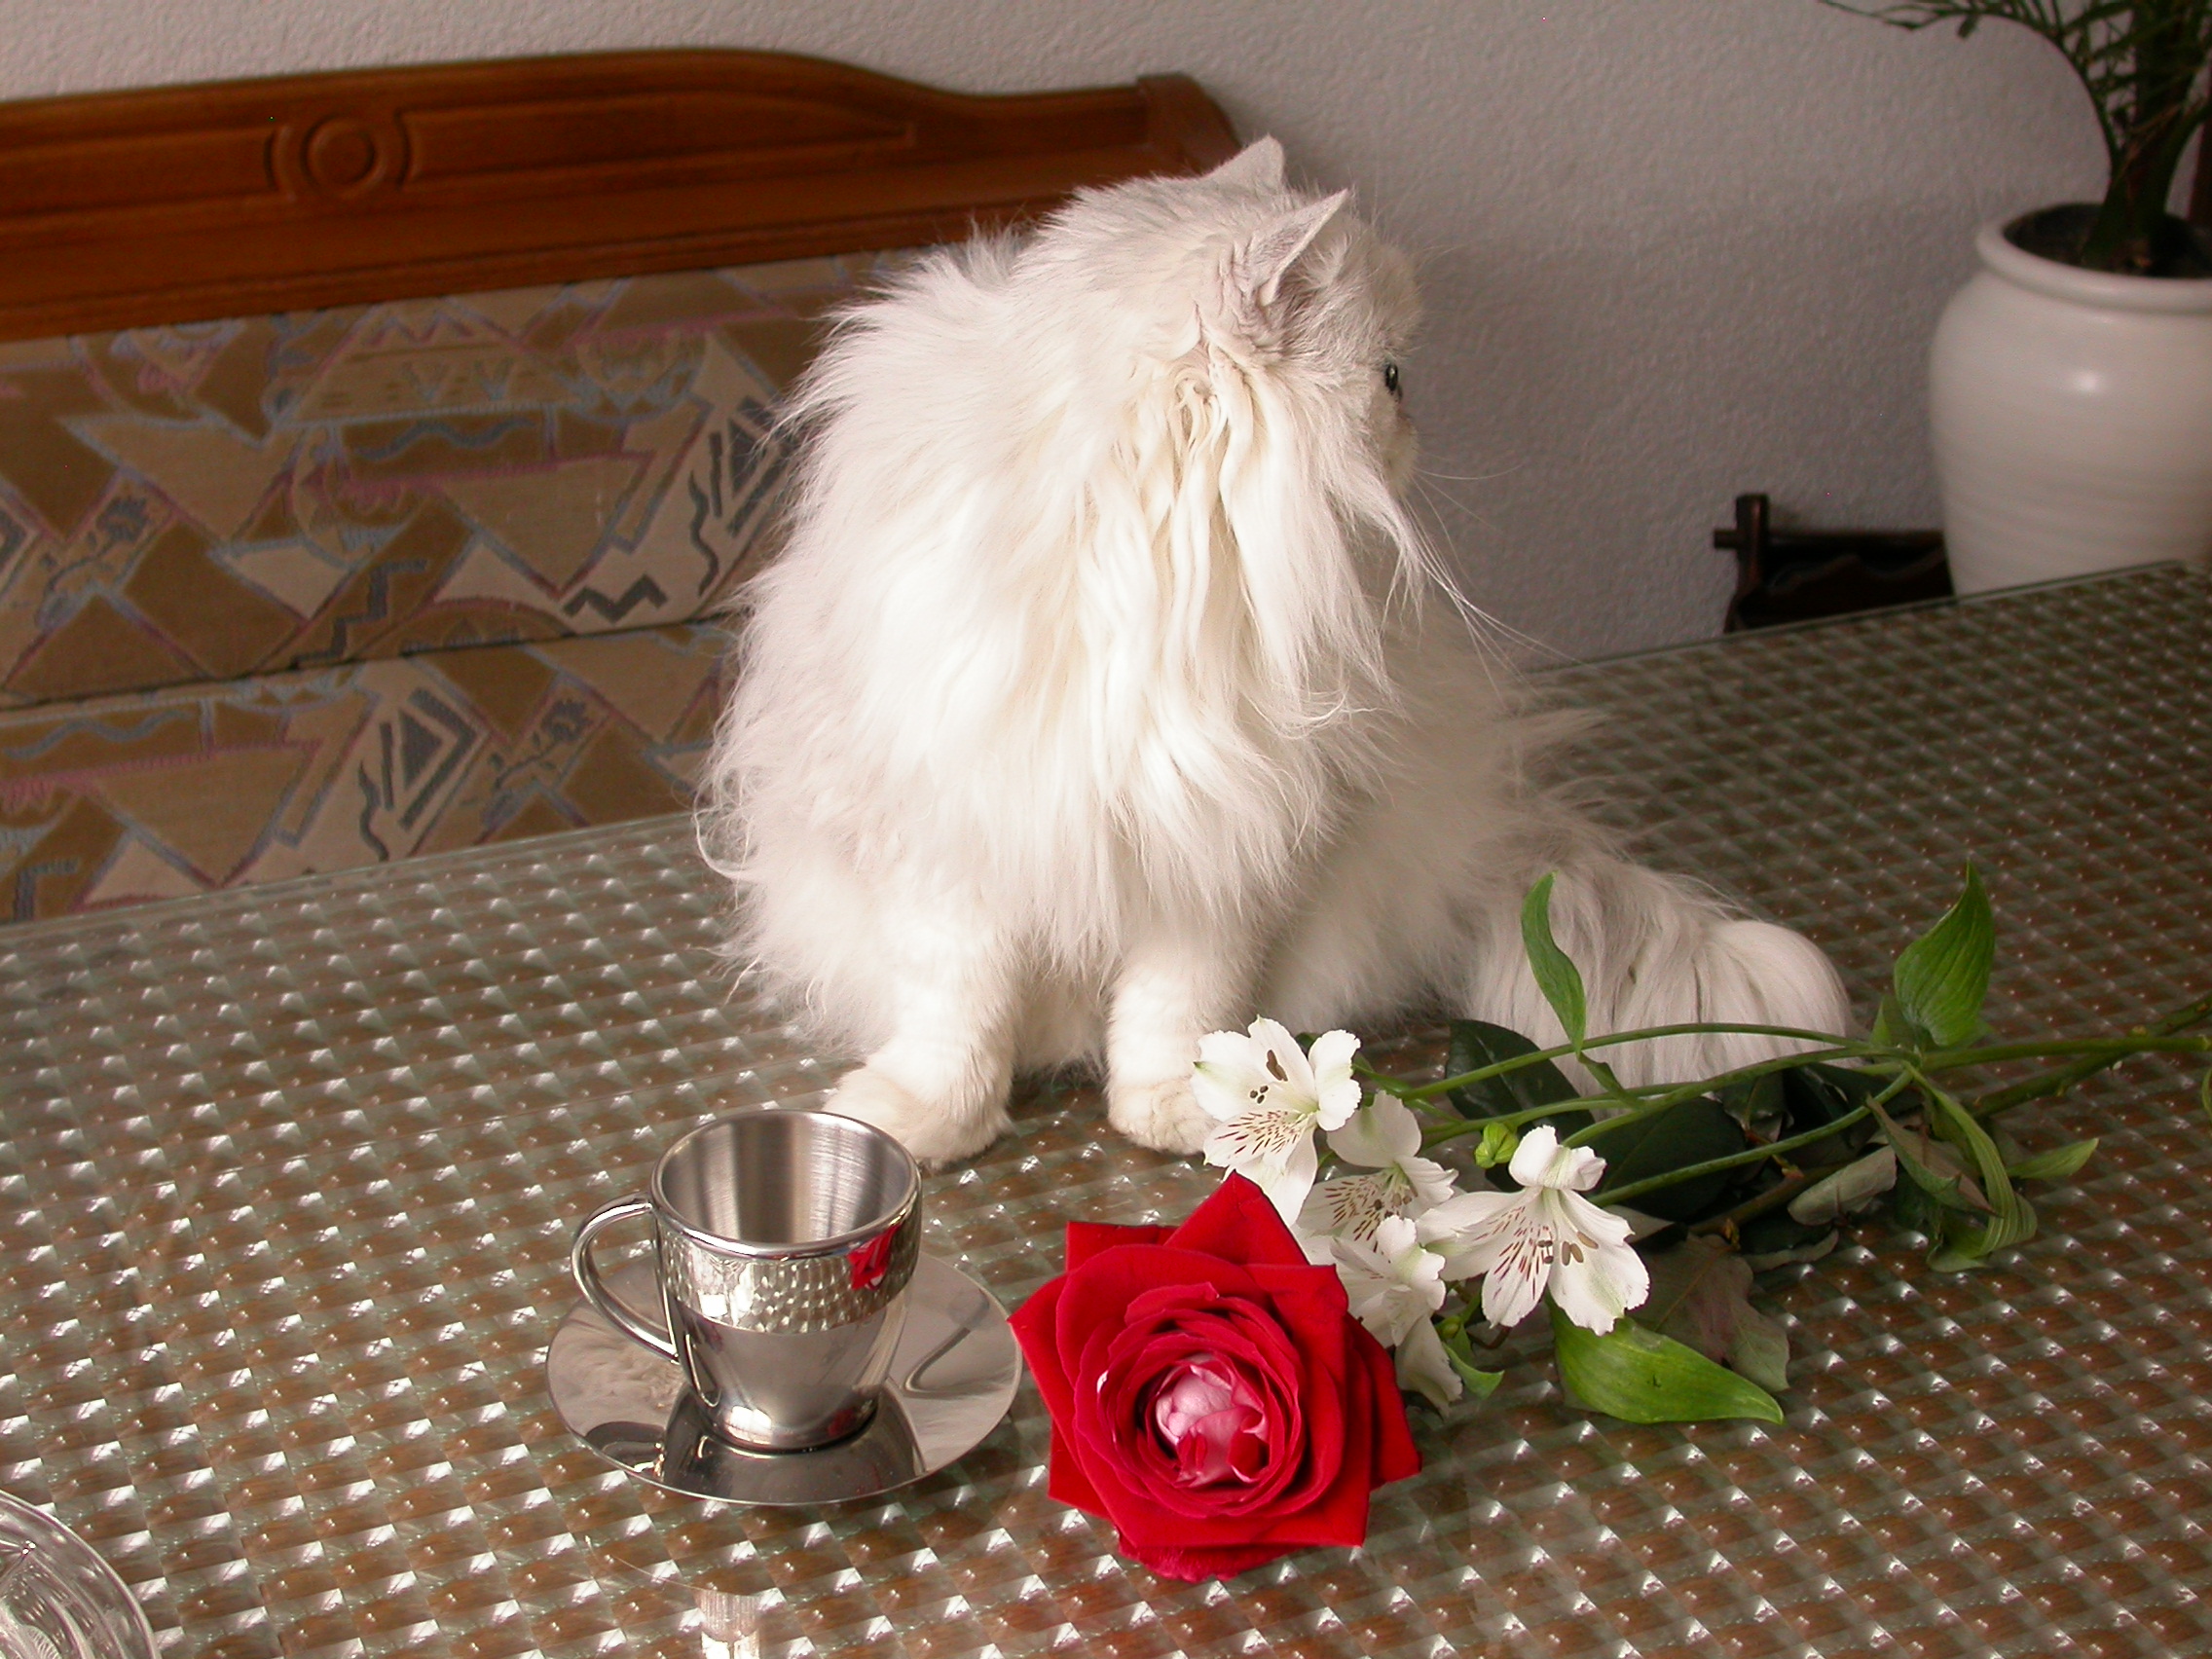 eva white angora cat on a table with a red rose and white flowers at its feet